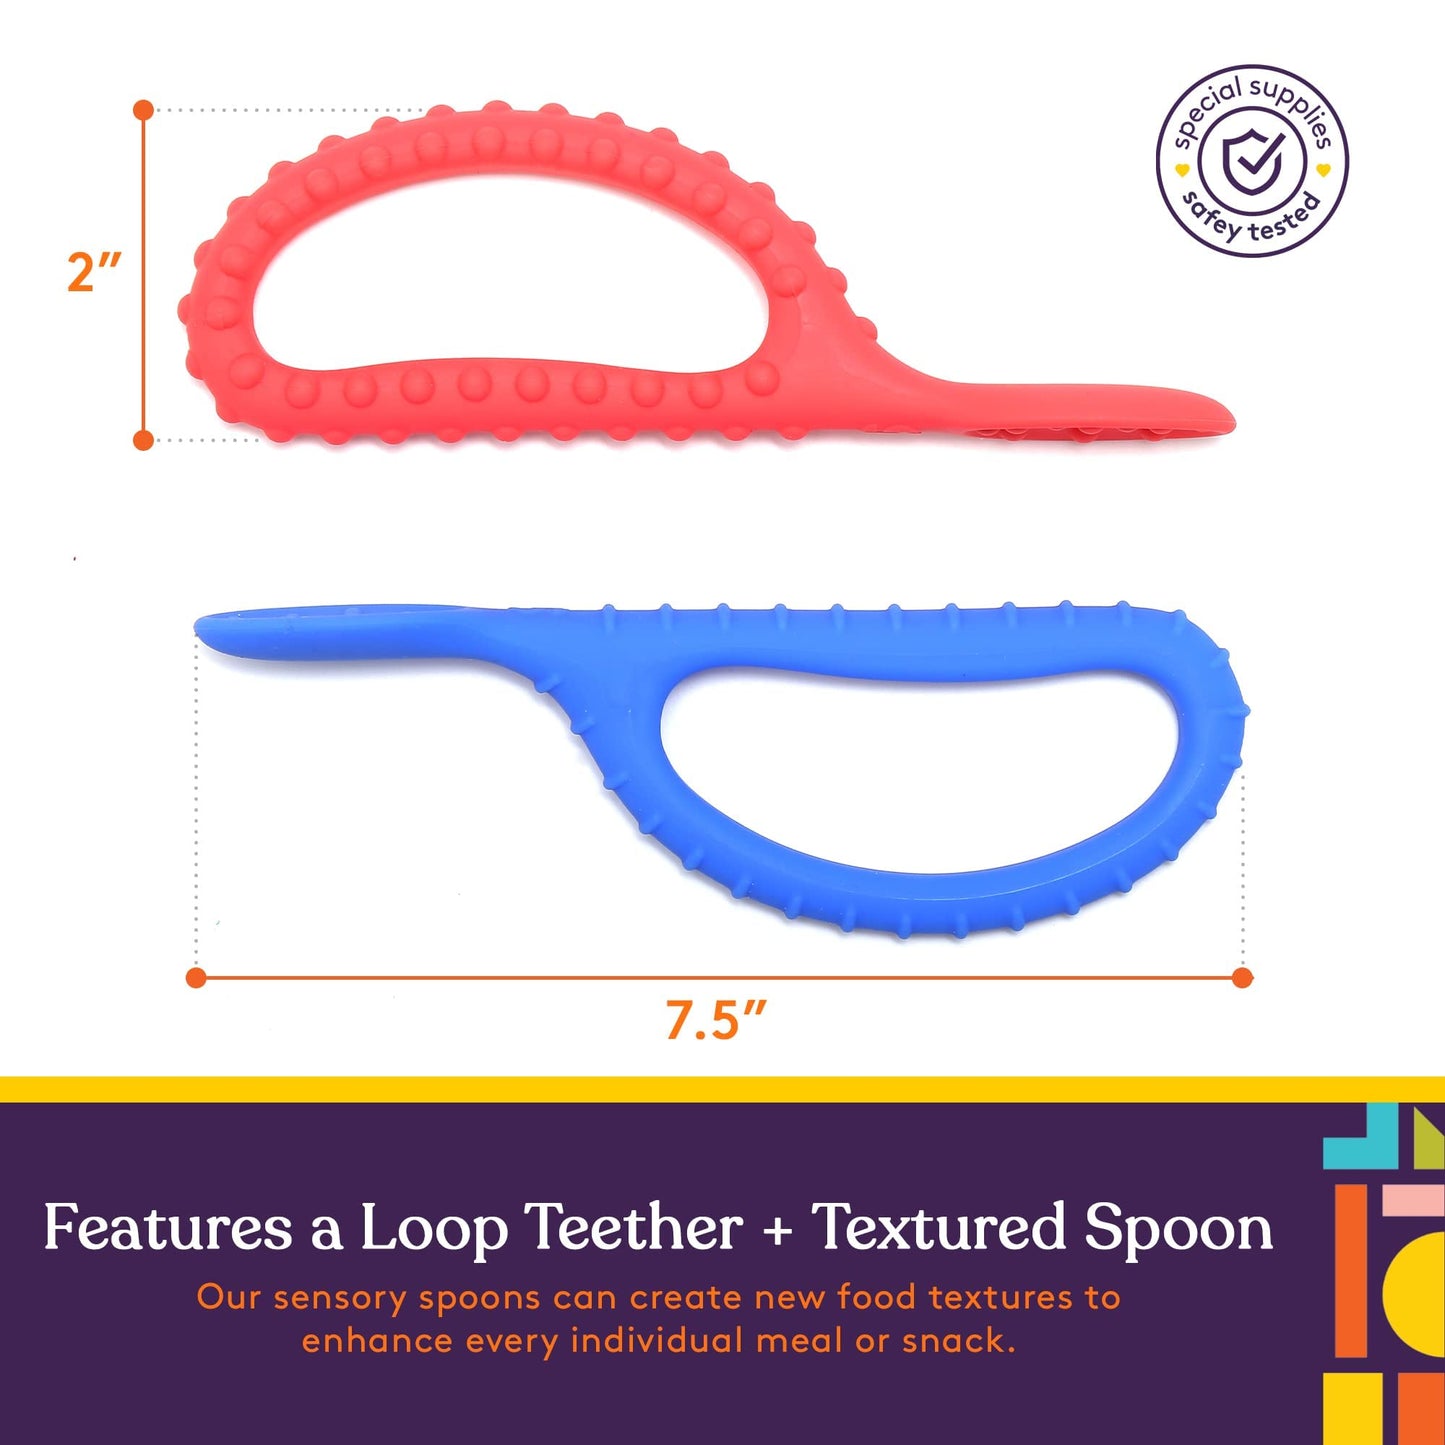 Special Supplies Duo Spoon Loops Oral Motor Therapy Tools, 2 Pack, Textured Stimulation and Sensory Input Treatment for Babies, Toddlers or Kids, BPA Free Silicone with Flexible, Easy Handle